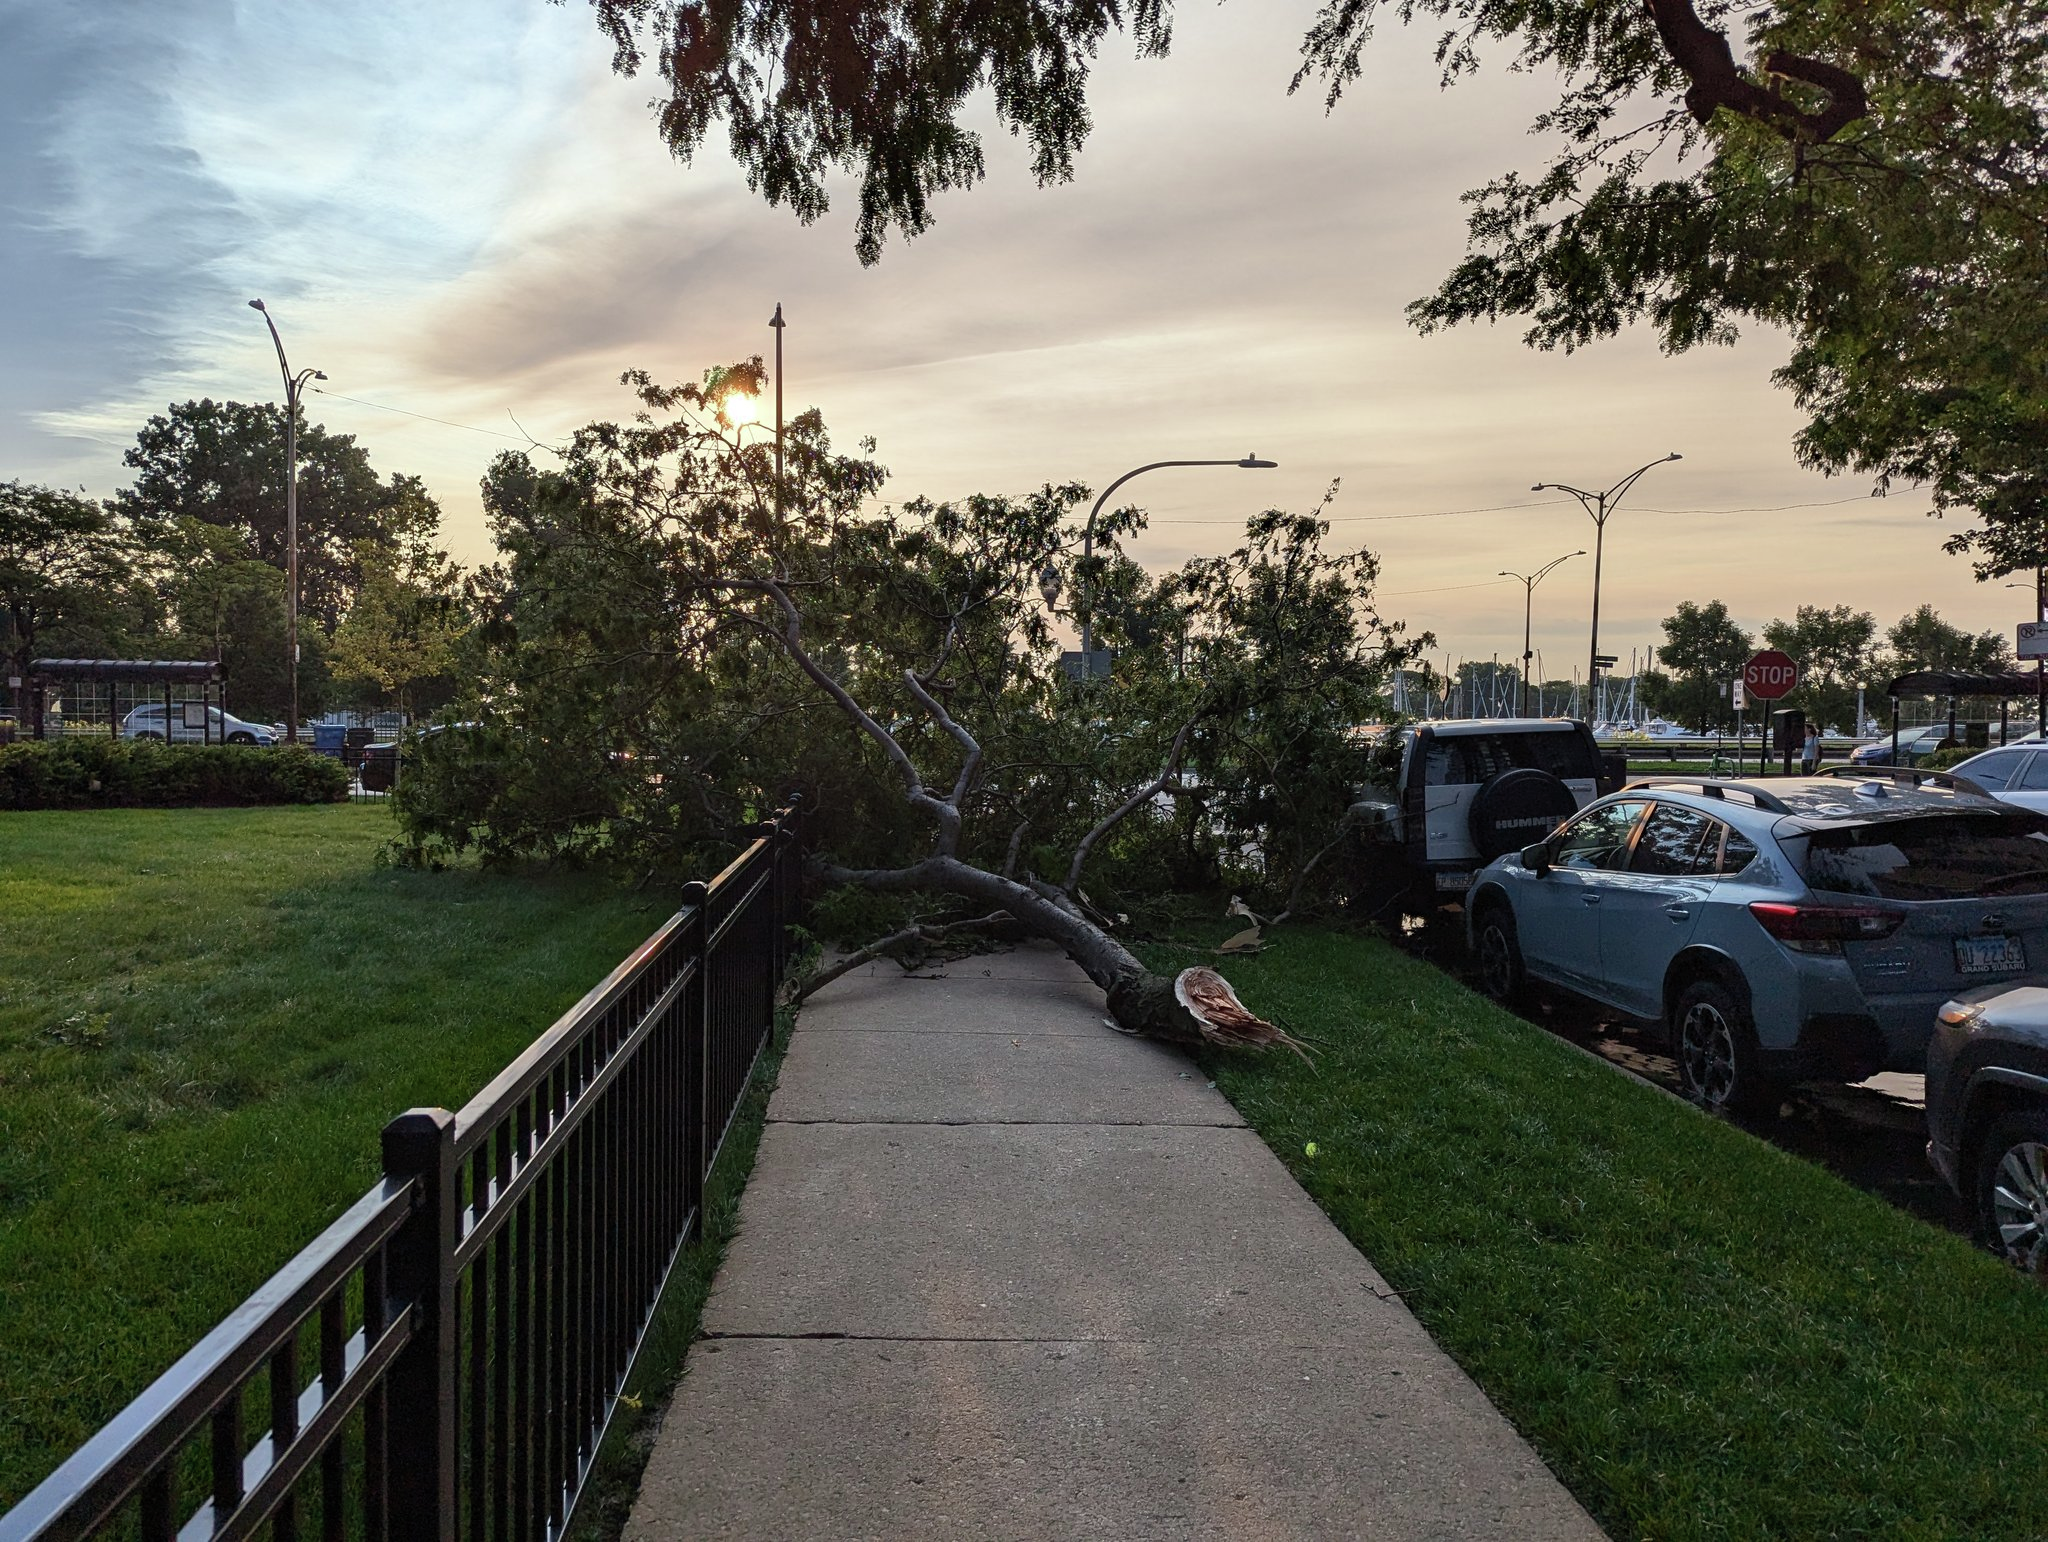 WEATHER: Severe weather blasts through Chicago area late last night